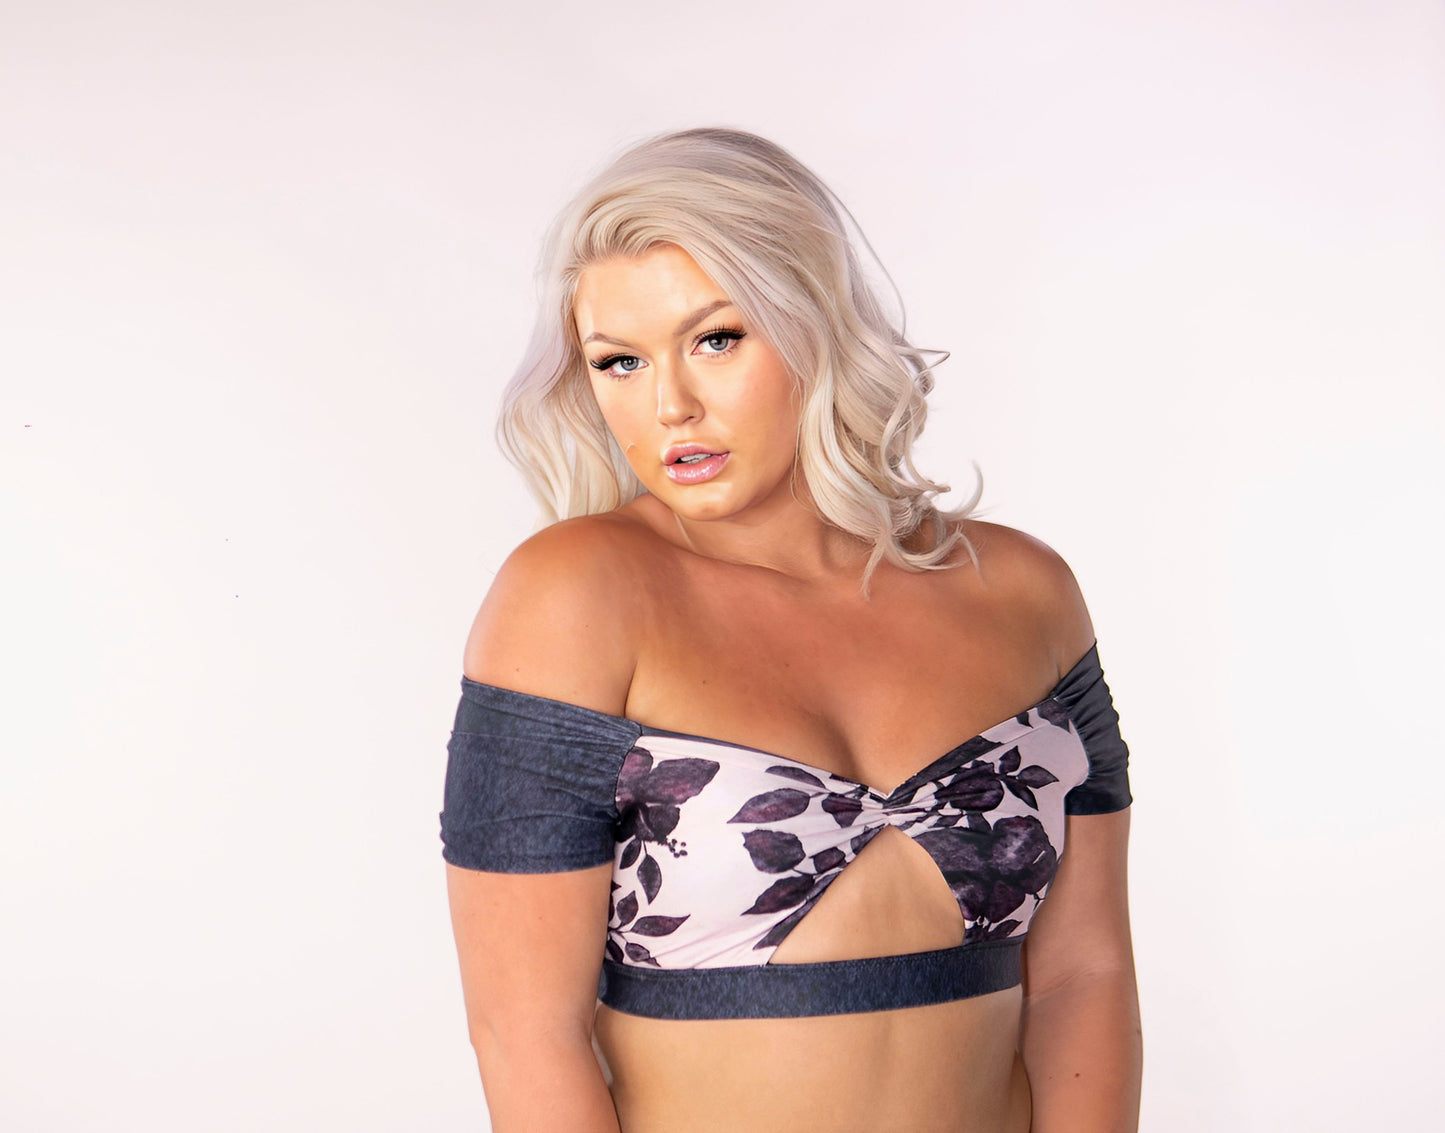 A reversible off the shoulder bikini top, solid navy blue wash on one side and on the other, a girlie pink floral pattern featuring blue hibiscus watercolour print. The front features a traingular cut away under the bust and a gathered center detail. The sleeves and broad elastic chest band neatly frame the design in solid navy blue.